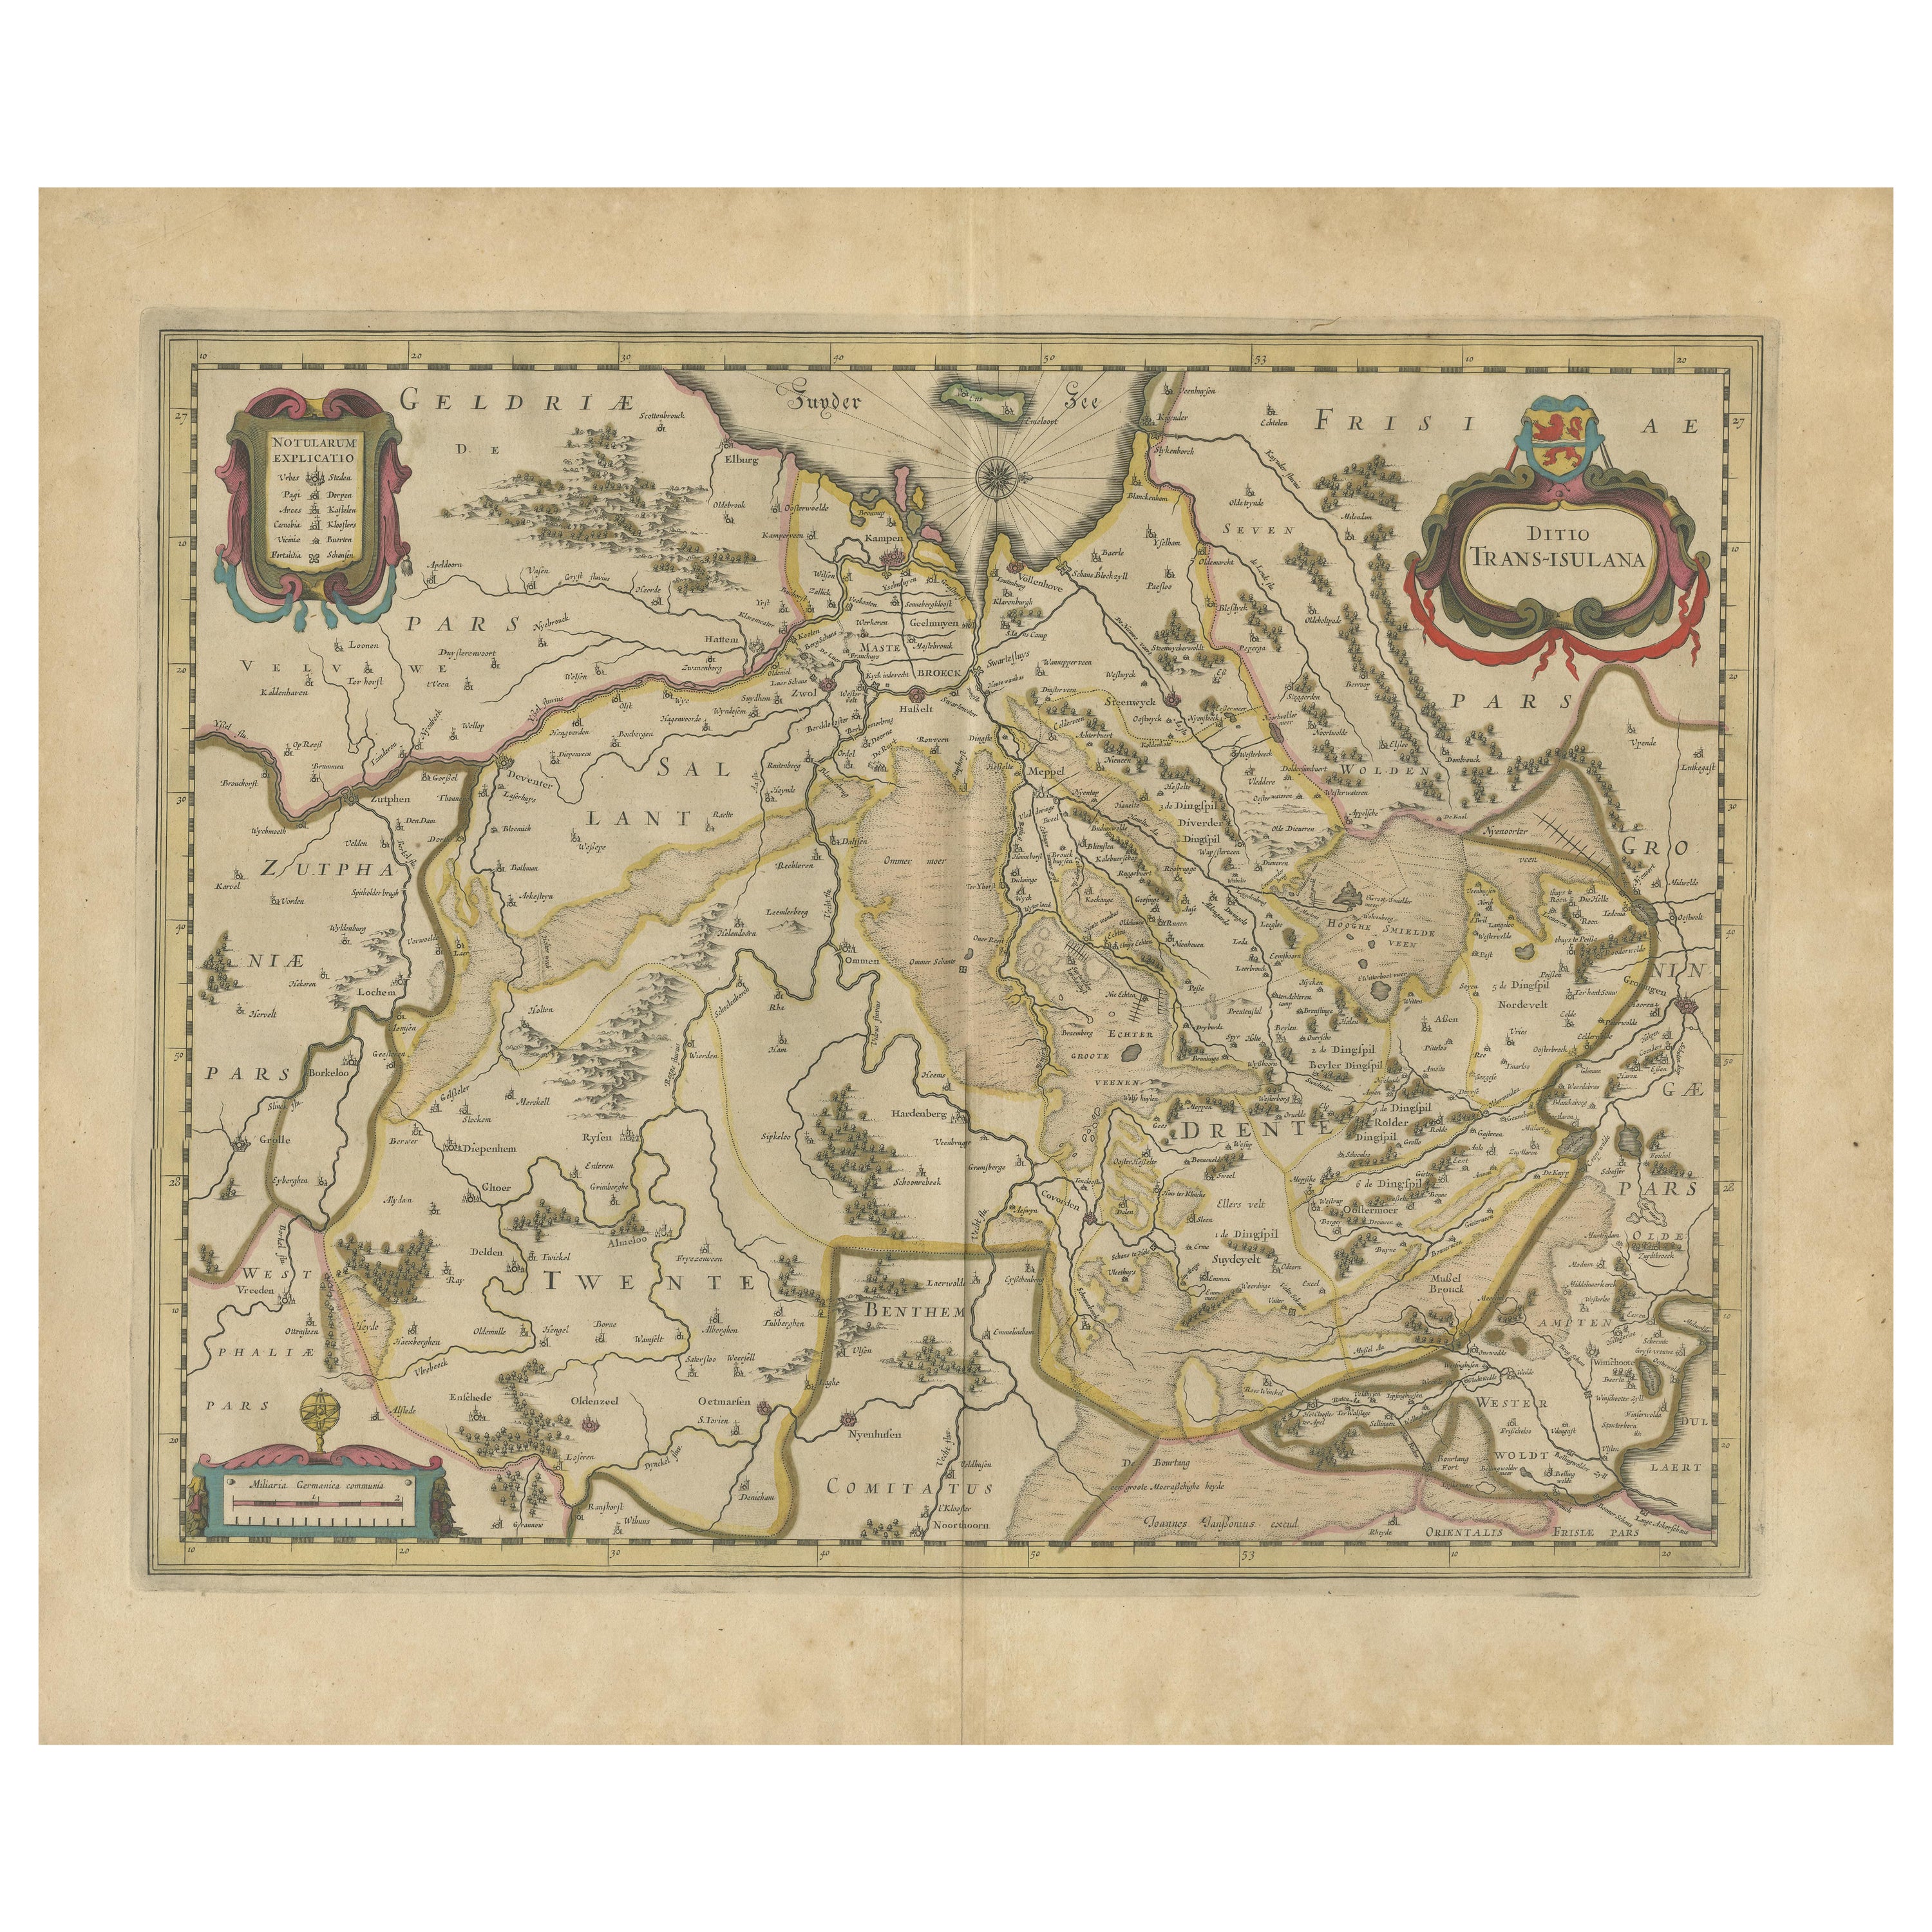 Antique Map by Janssonius of the Dutch Province of Overijsel, ca.1650